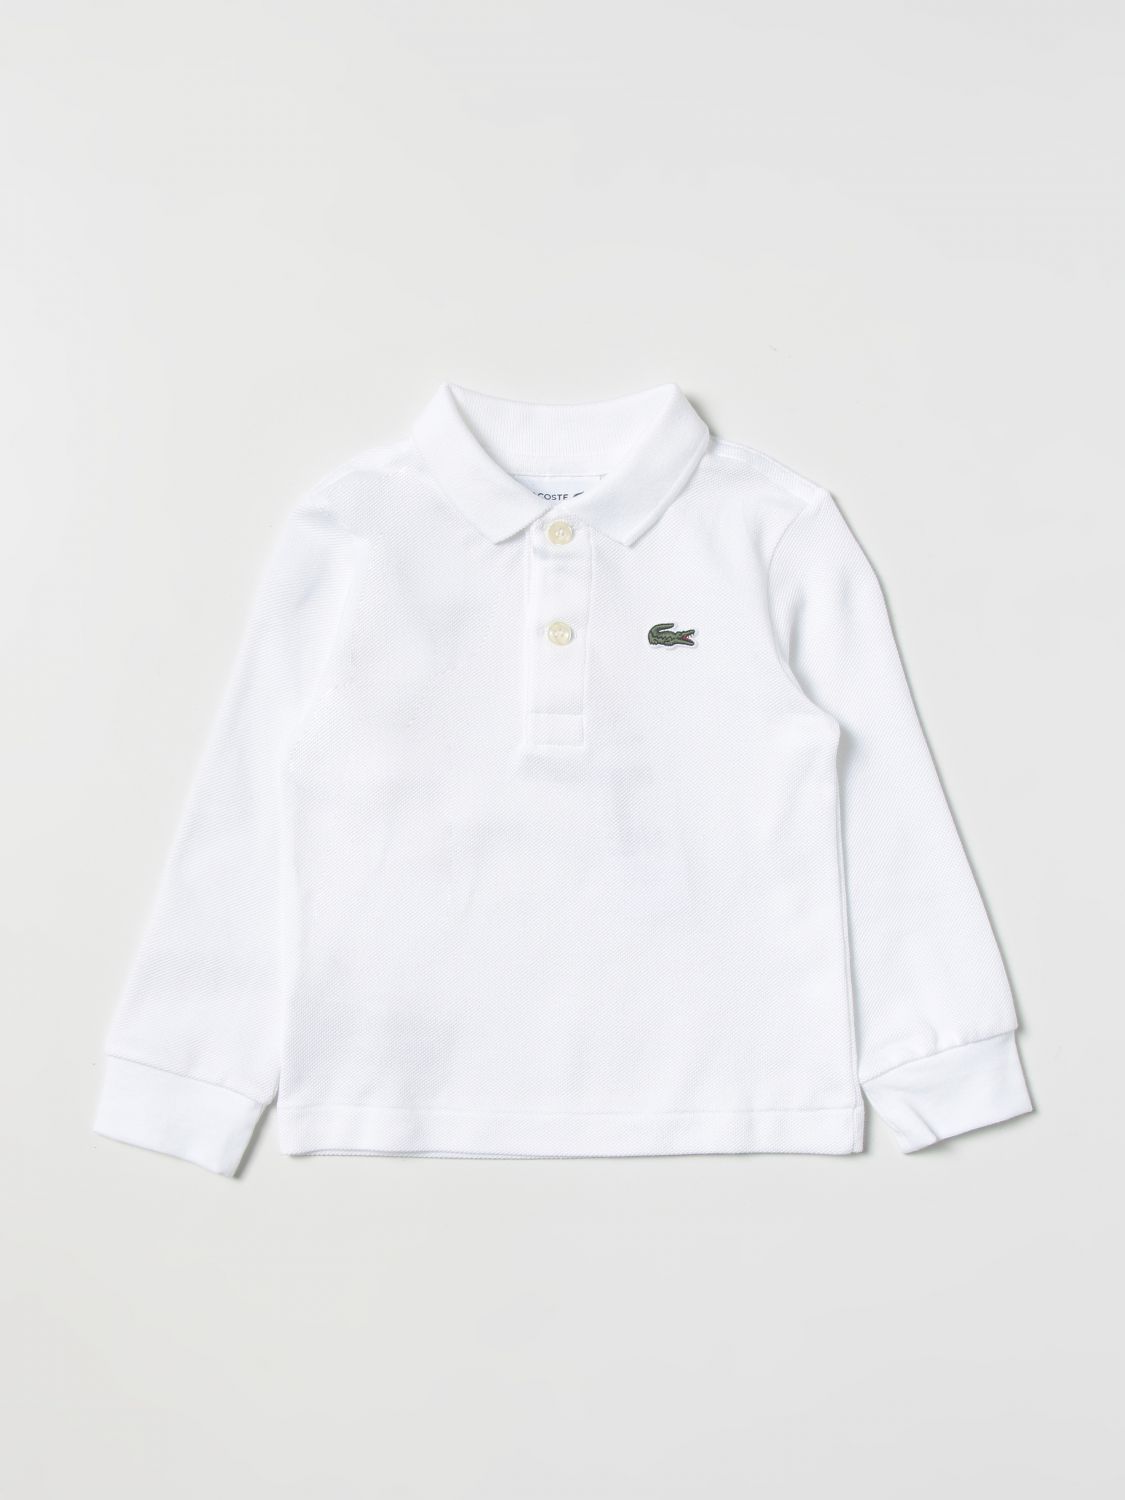 party mucus Counterpart LACOSTE: polo shirt for boys - White | Lacoste polo shirt PJ8915 online on  GIGLIO.COM